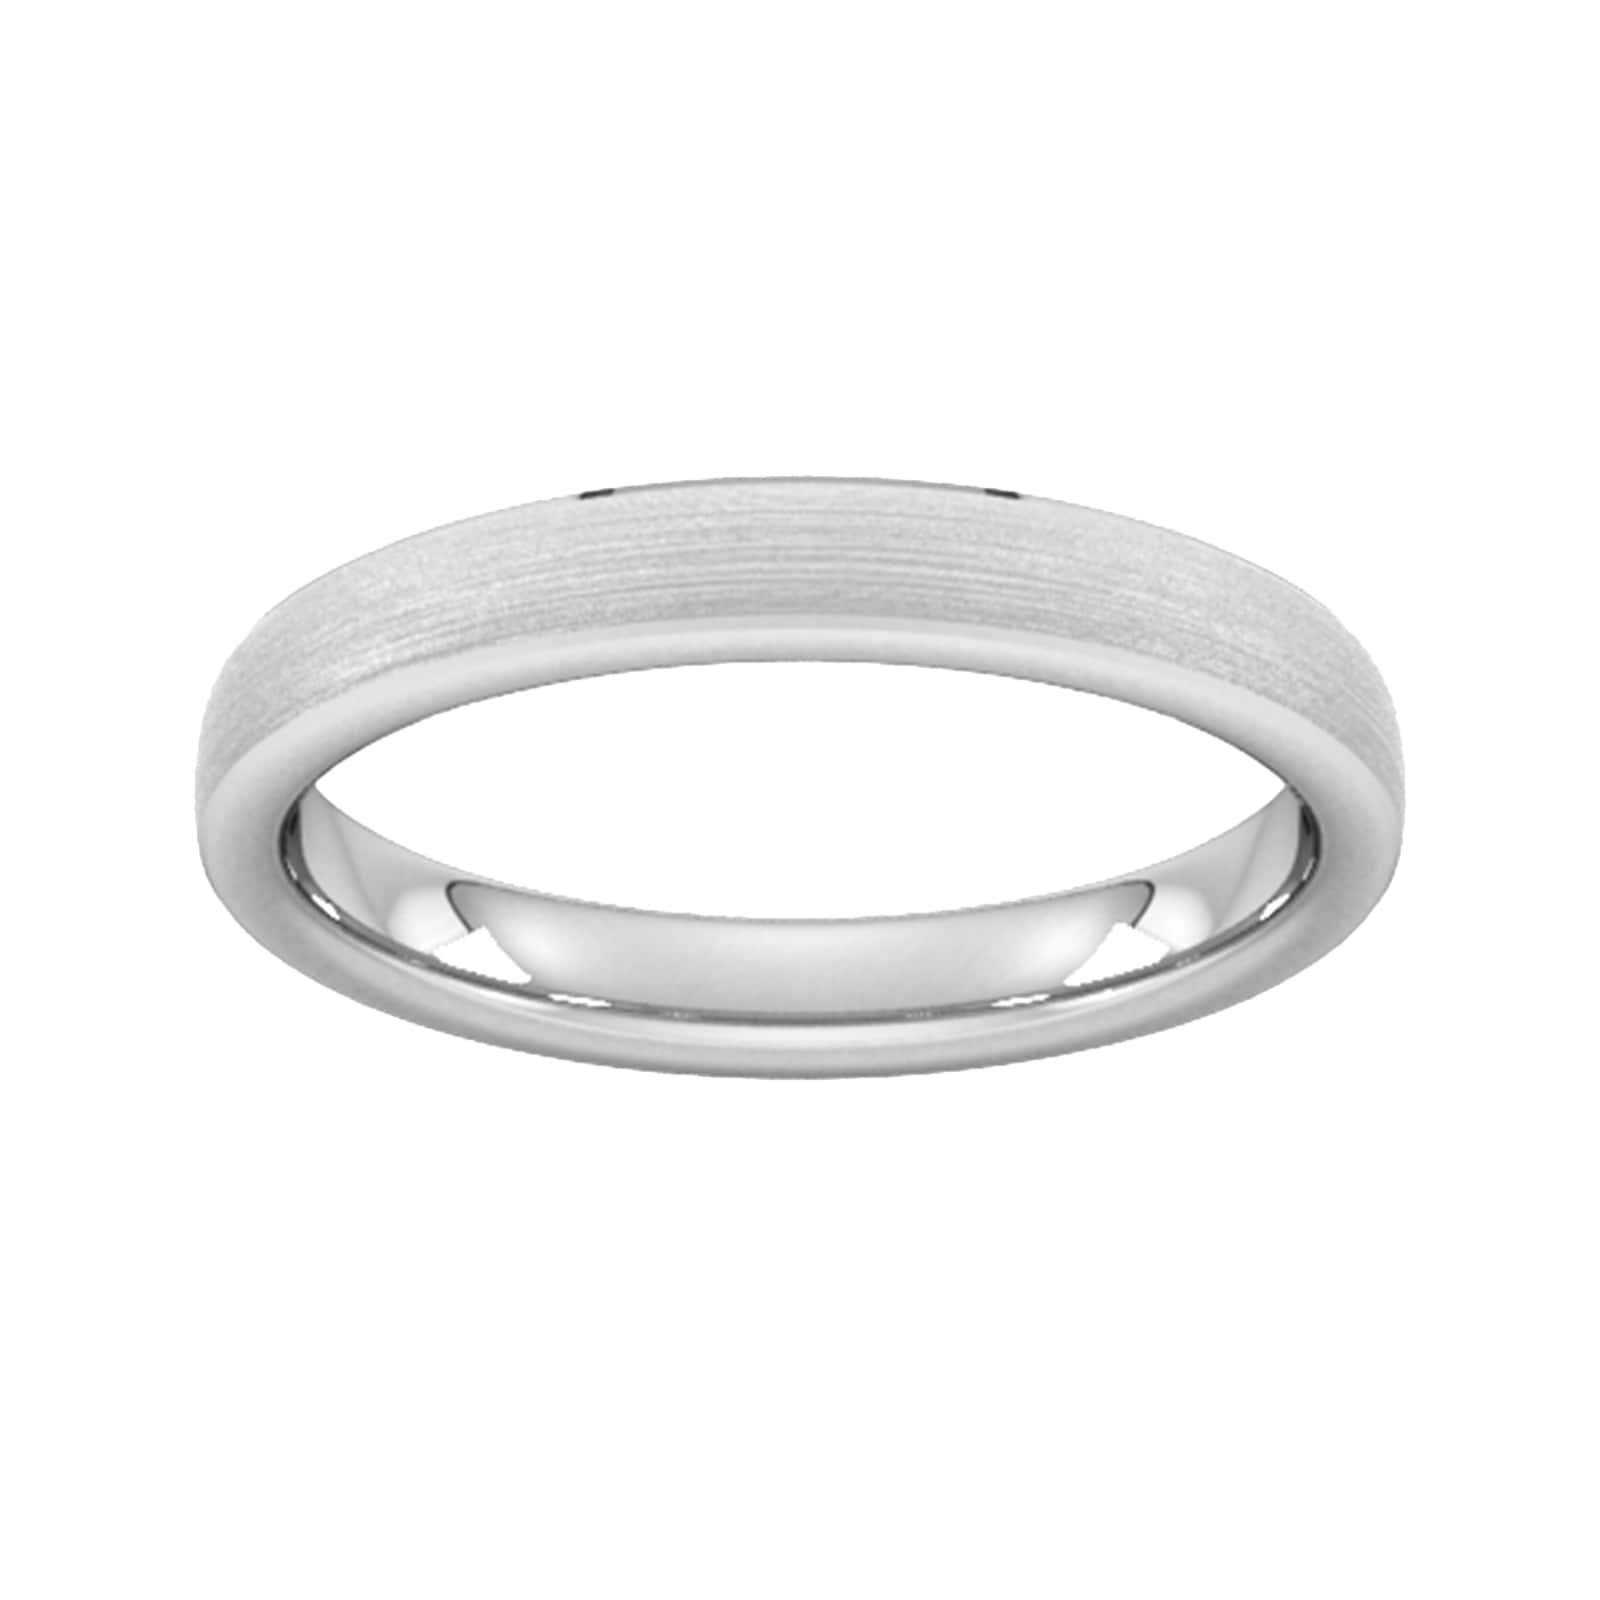 3mm Traditional Court Heavy Polished Chamfered Edges With Matt Centre Wedding Ring In 950 Palladium - Ring Size J